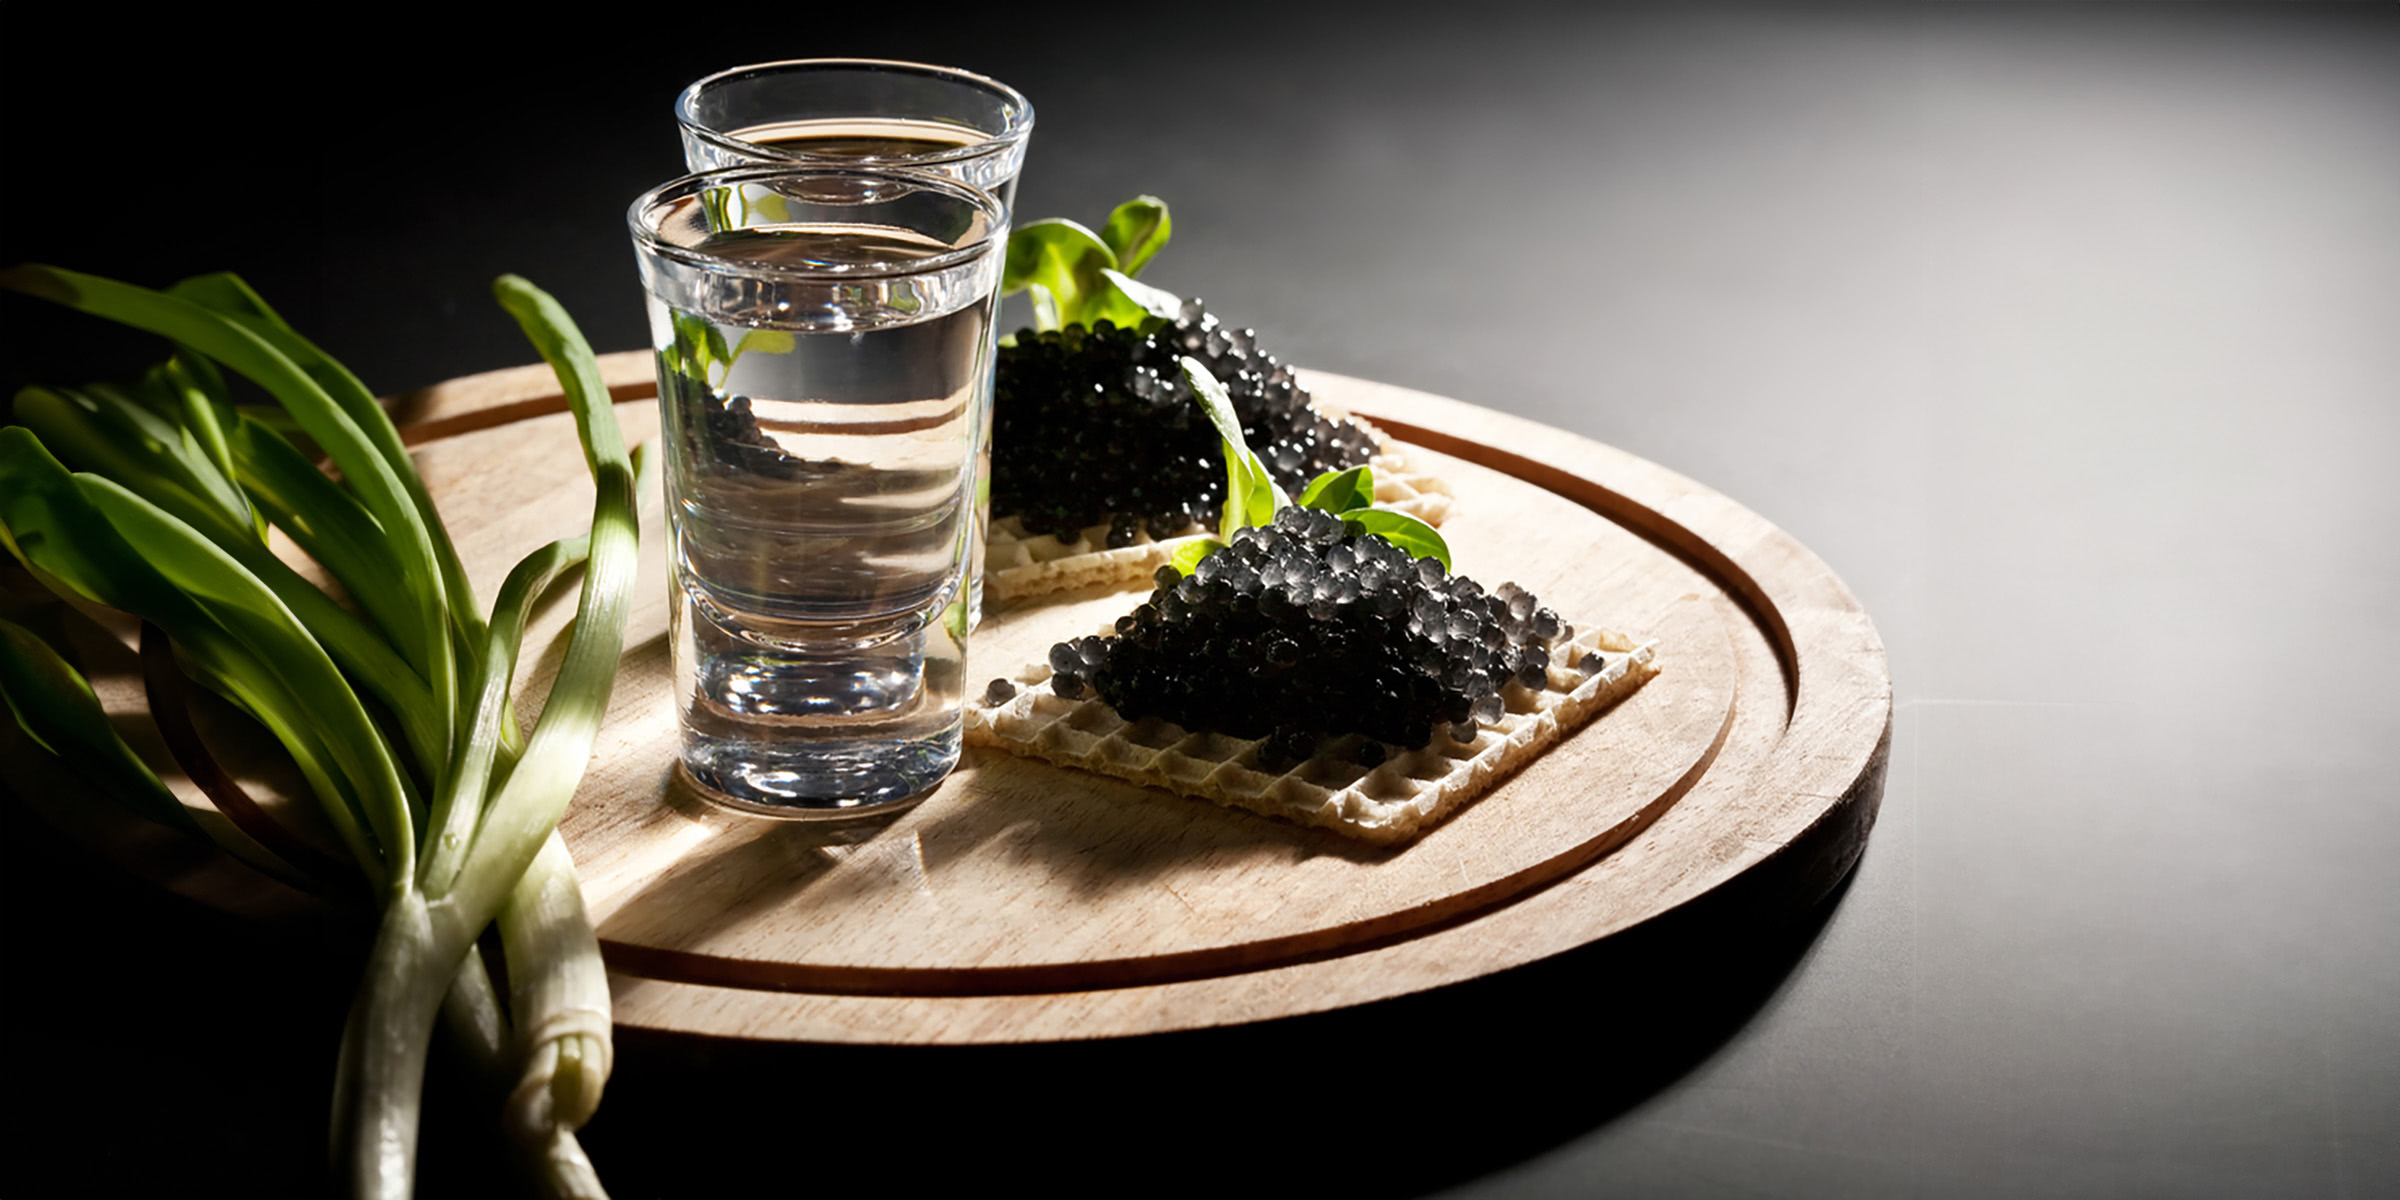 most-expensive-caviar-in-the-world-luxe-digital.jpg